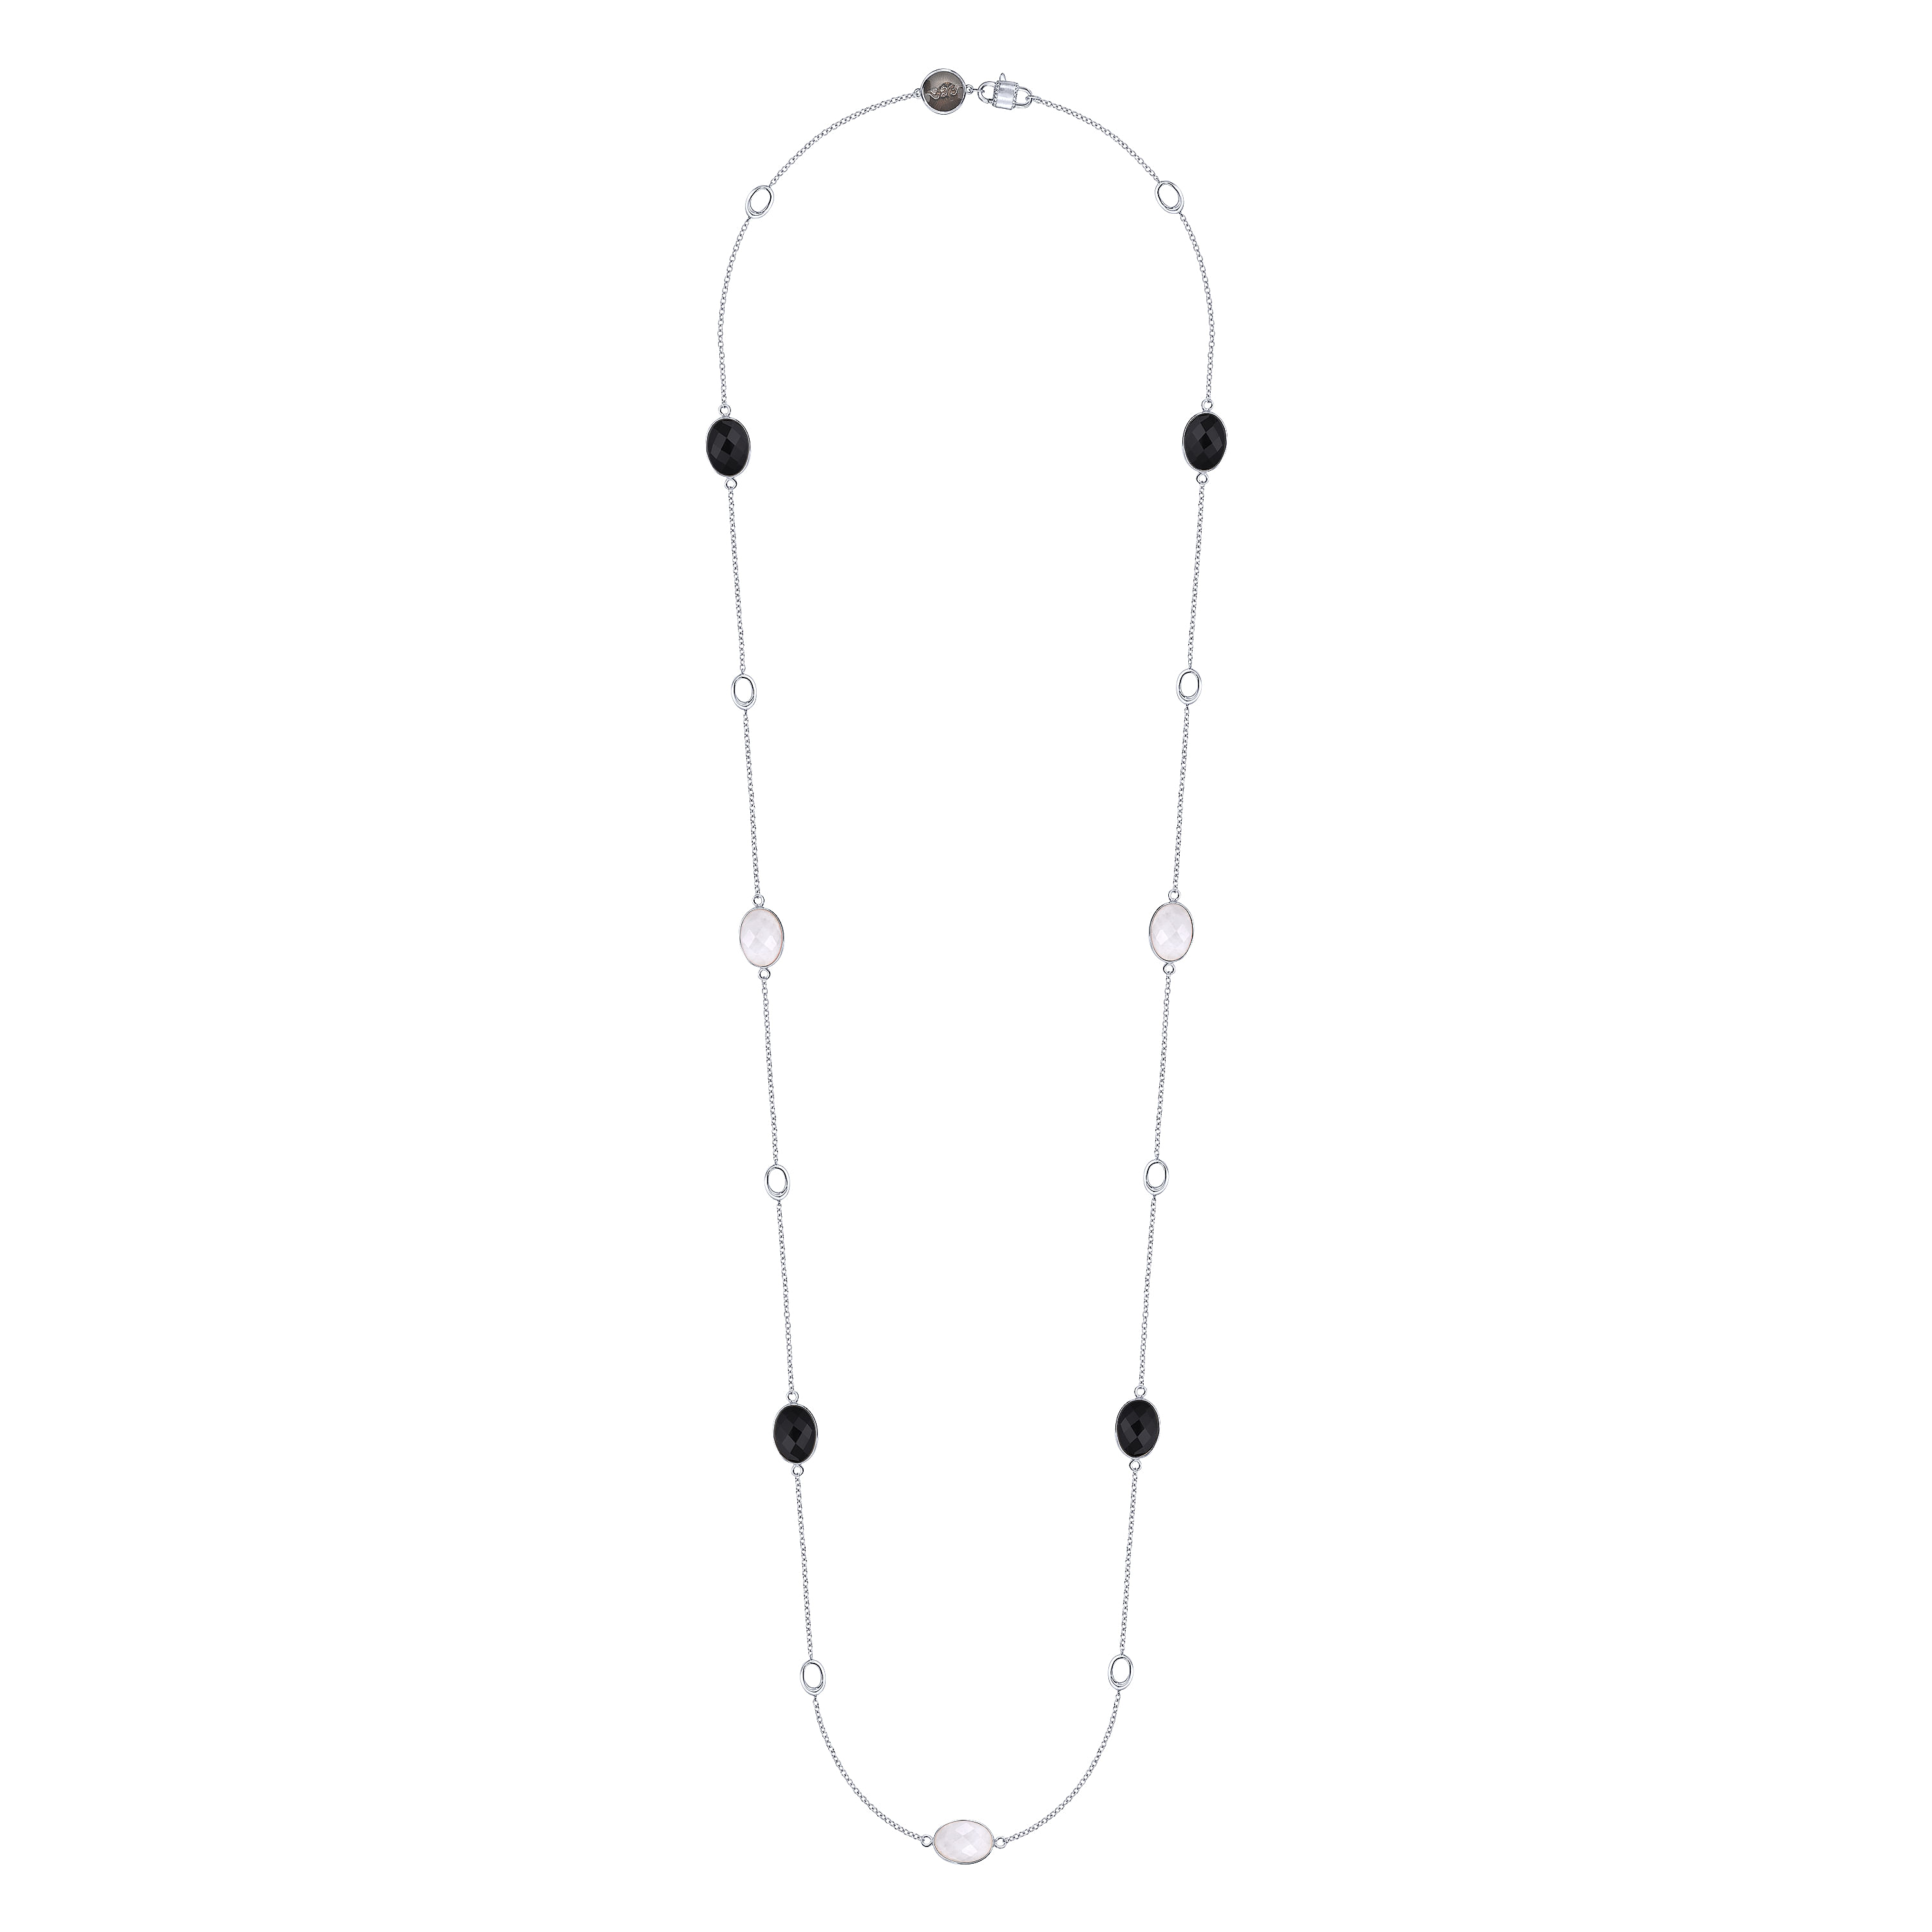 36 inch Long 925 Sterling Silver Oval Onyx and White Agate Station Necklace